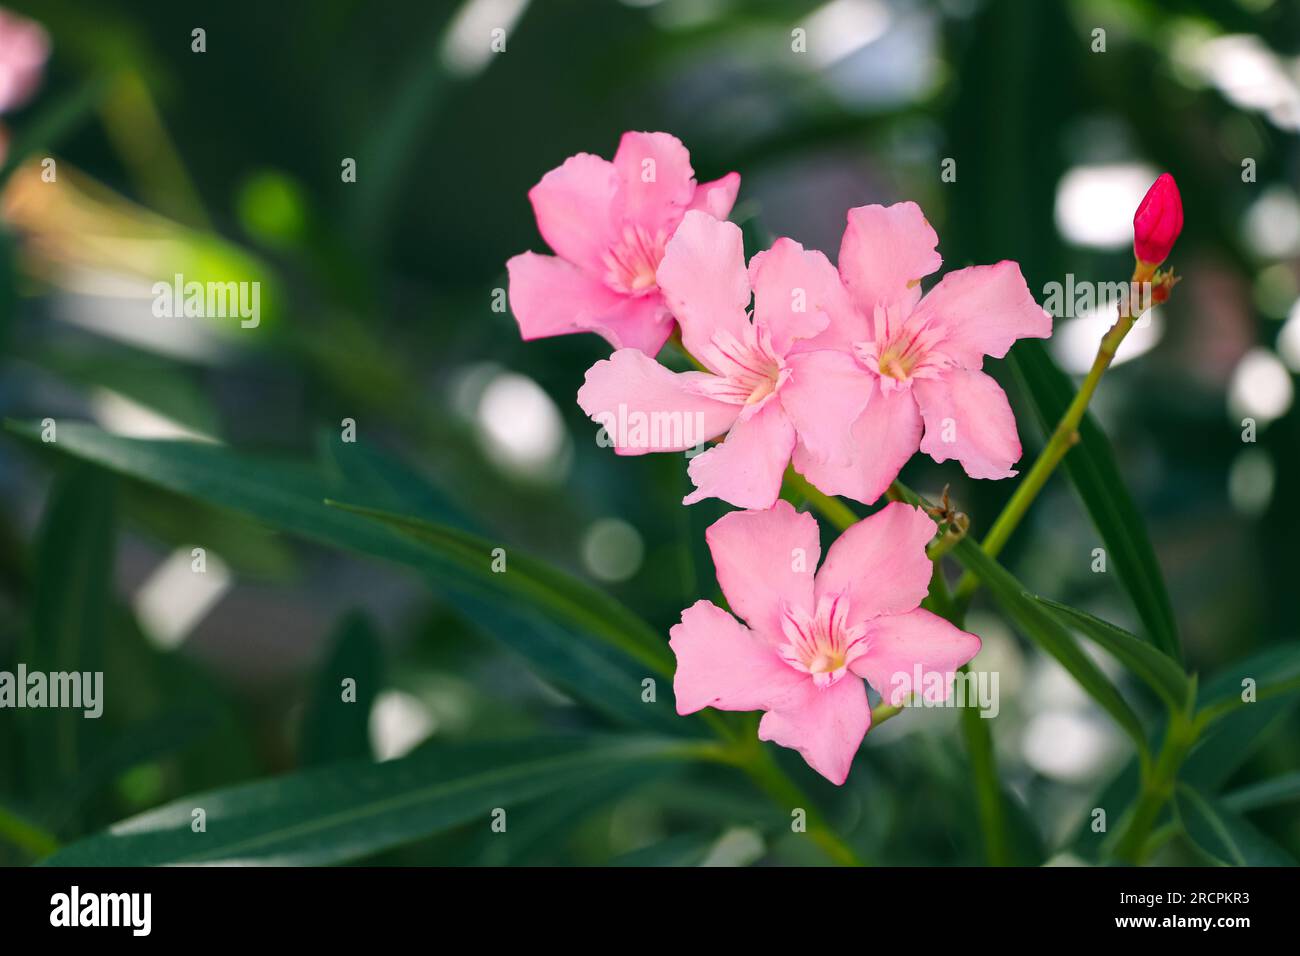 Bright pink tropical flowers blossom. Pink exotic flowers close up. Stock Photo